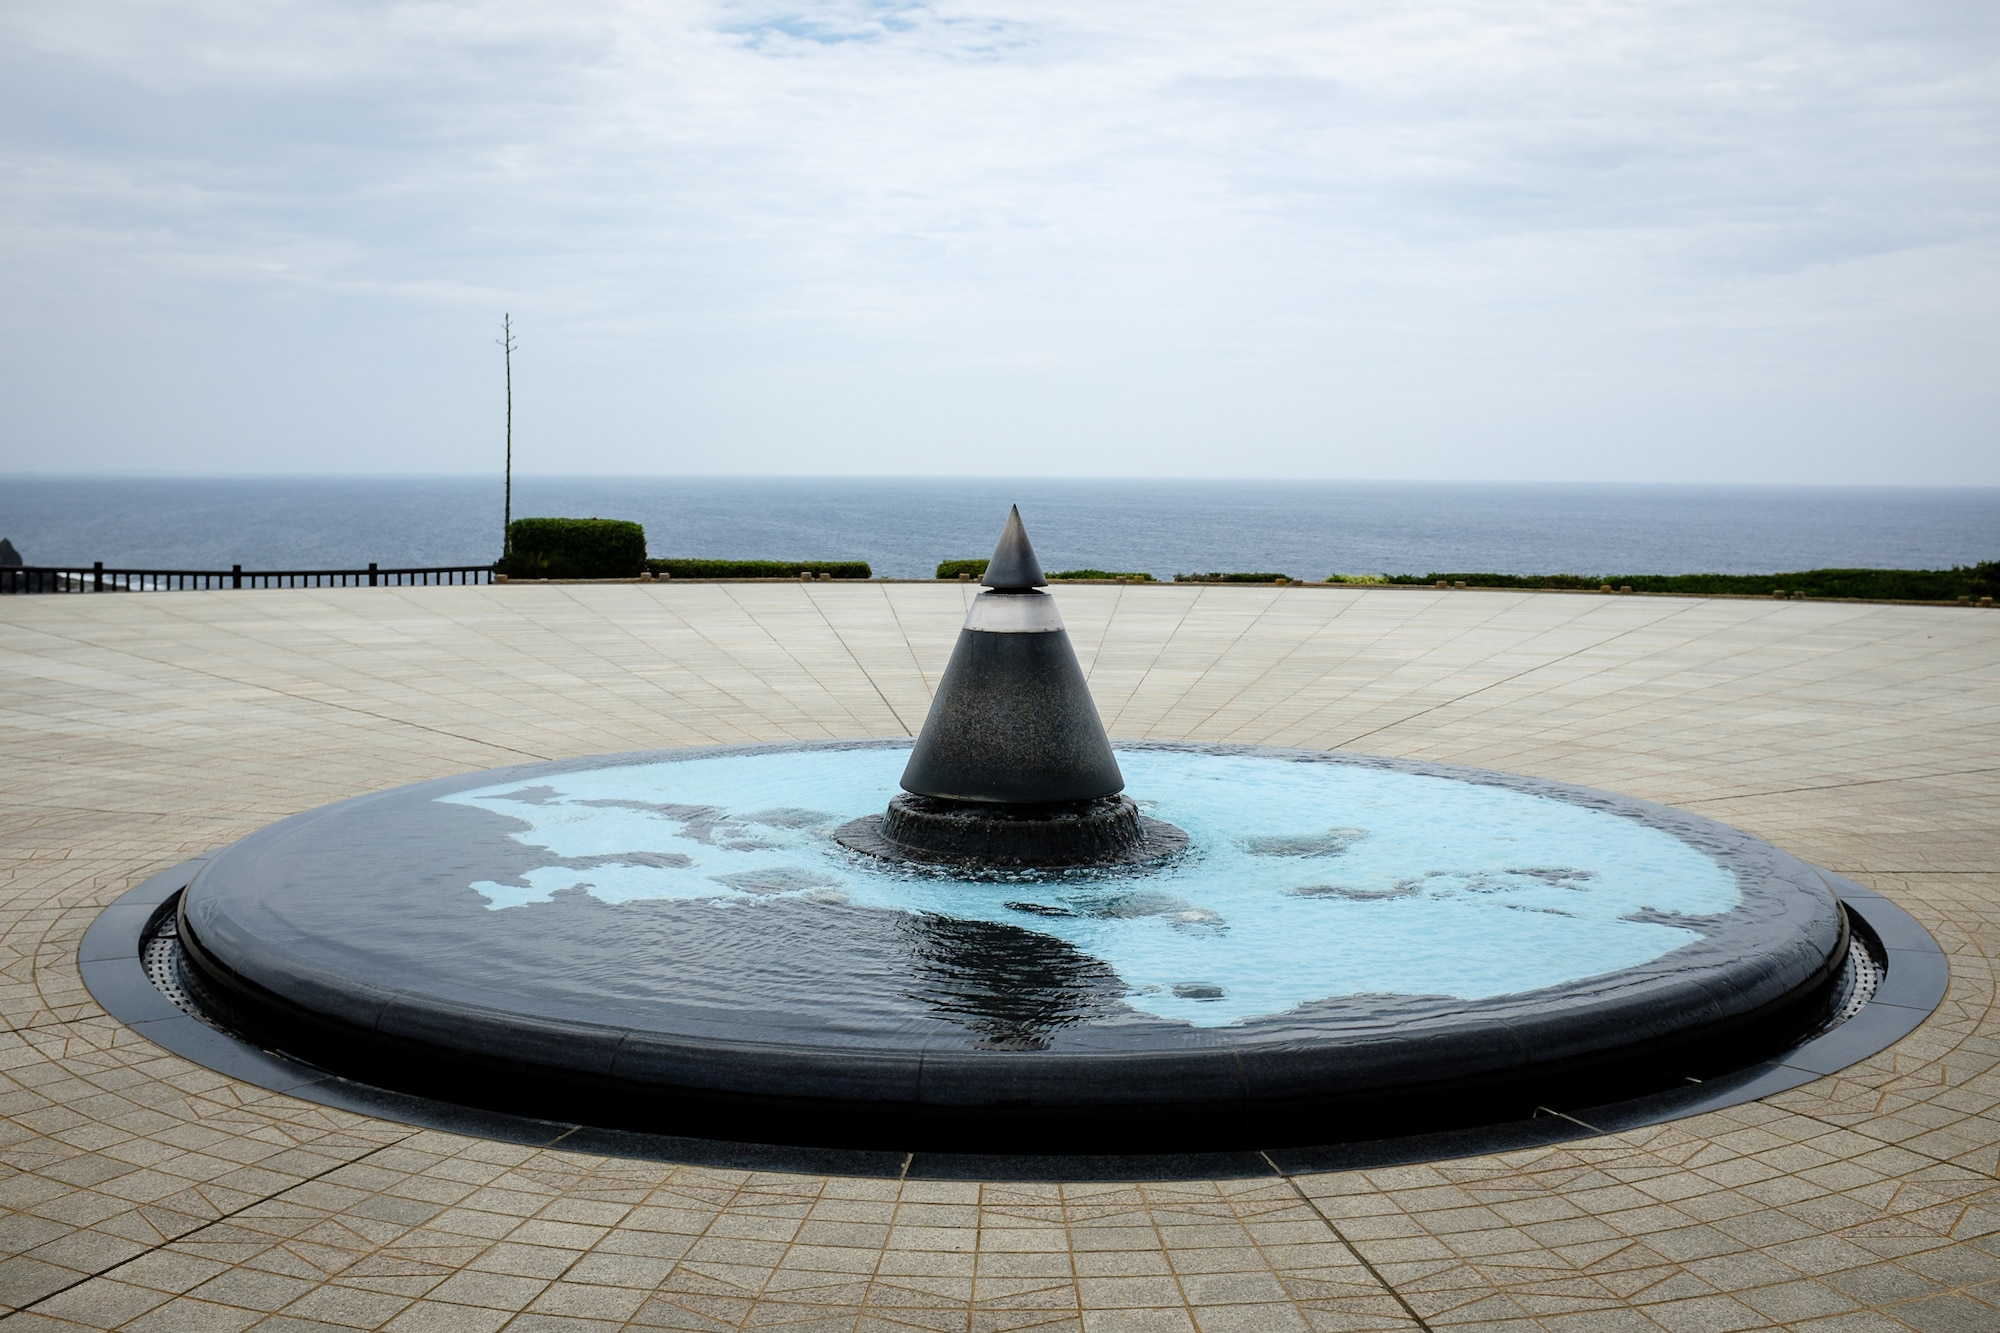 The Eternal Flame sits in the center of a pool of water and map depicting the Pacific region located on the grounds of the Okinawa Prefectural Peace Memorial Museum in Itoman City, Okinawa. The flame is part of a larger monument called The Cornerstone of Peace, which has more than 240,000 names etched in stone of those who died in the Battle of Okinawa. (U.S. Air Force photo by Tech. Sgt. Alexy Saltekoff)